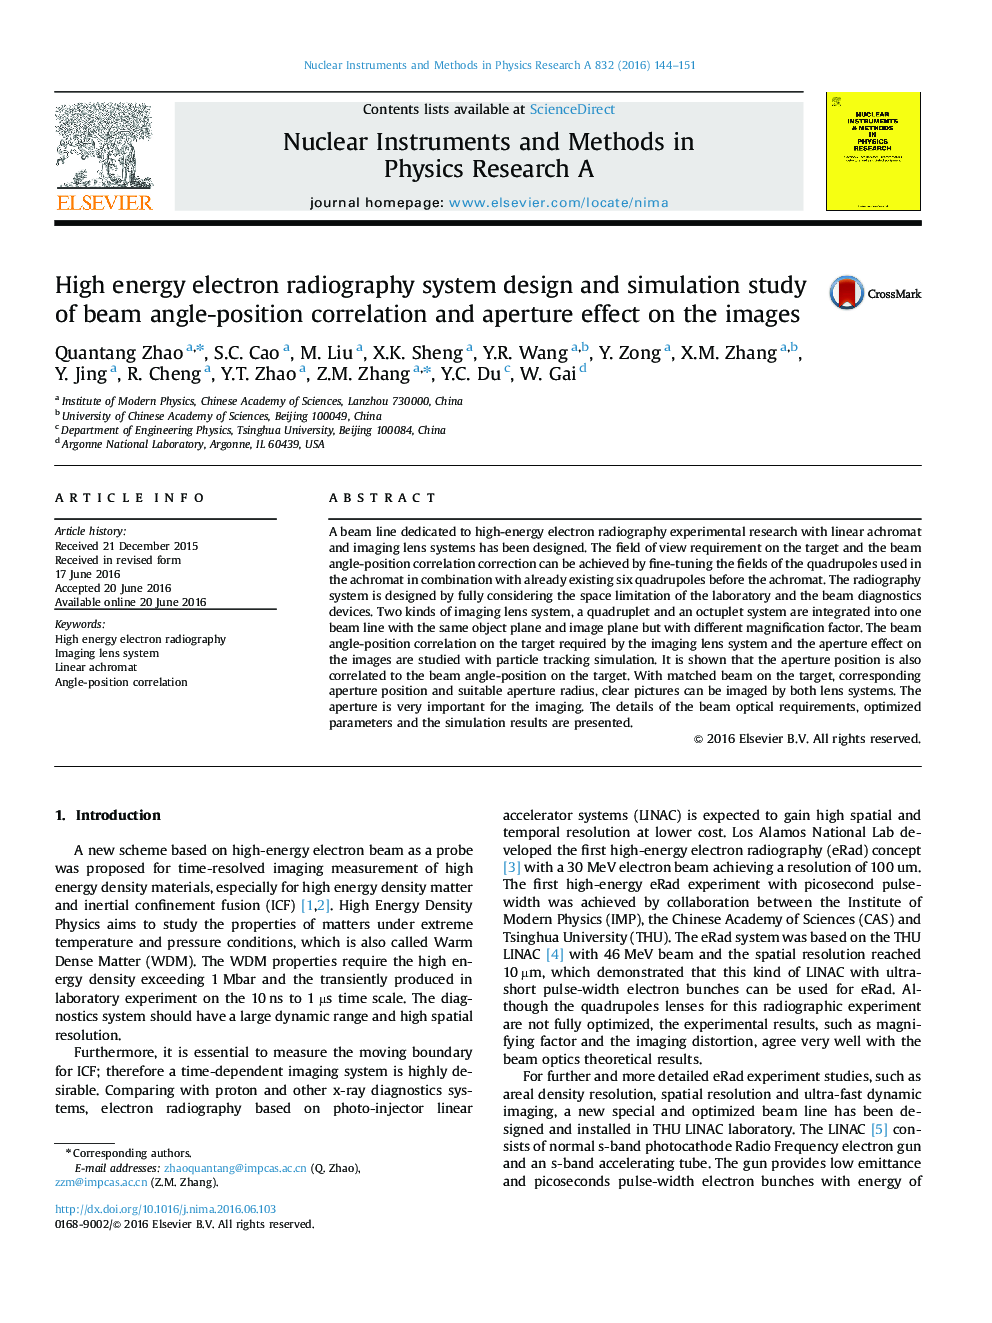 High energy electron radiography system design and simulation study of beam angle-position correlation and aperture effect on the images